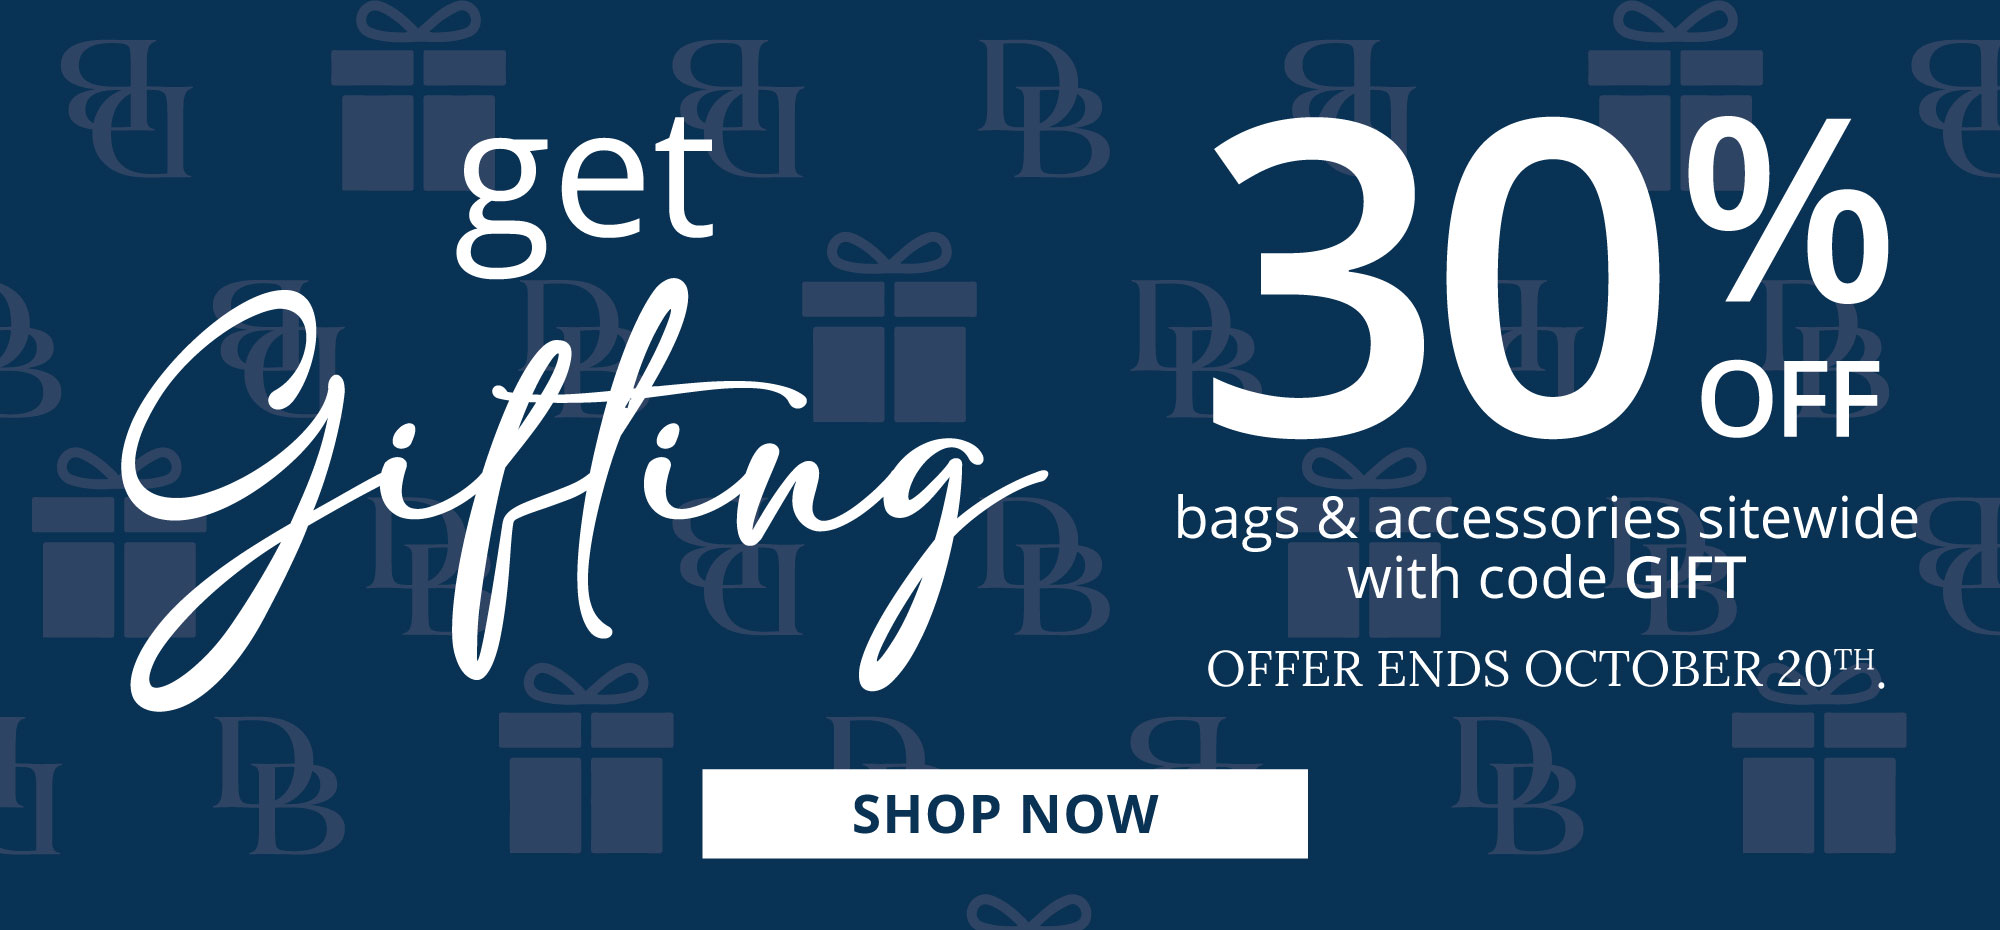  A 0 OFF bags accessories sitewide with code GIFT OFFER ENDS OCTOBER 20, 